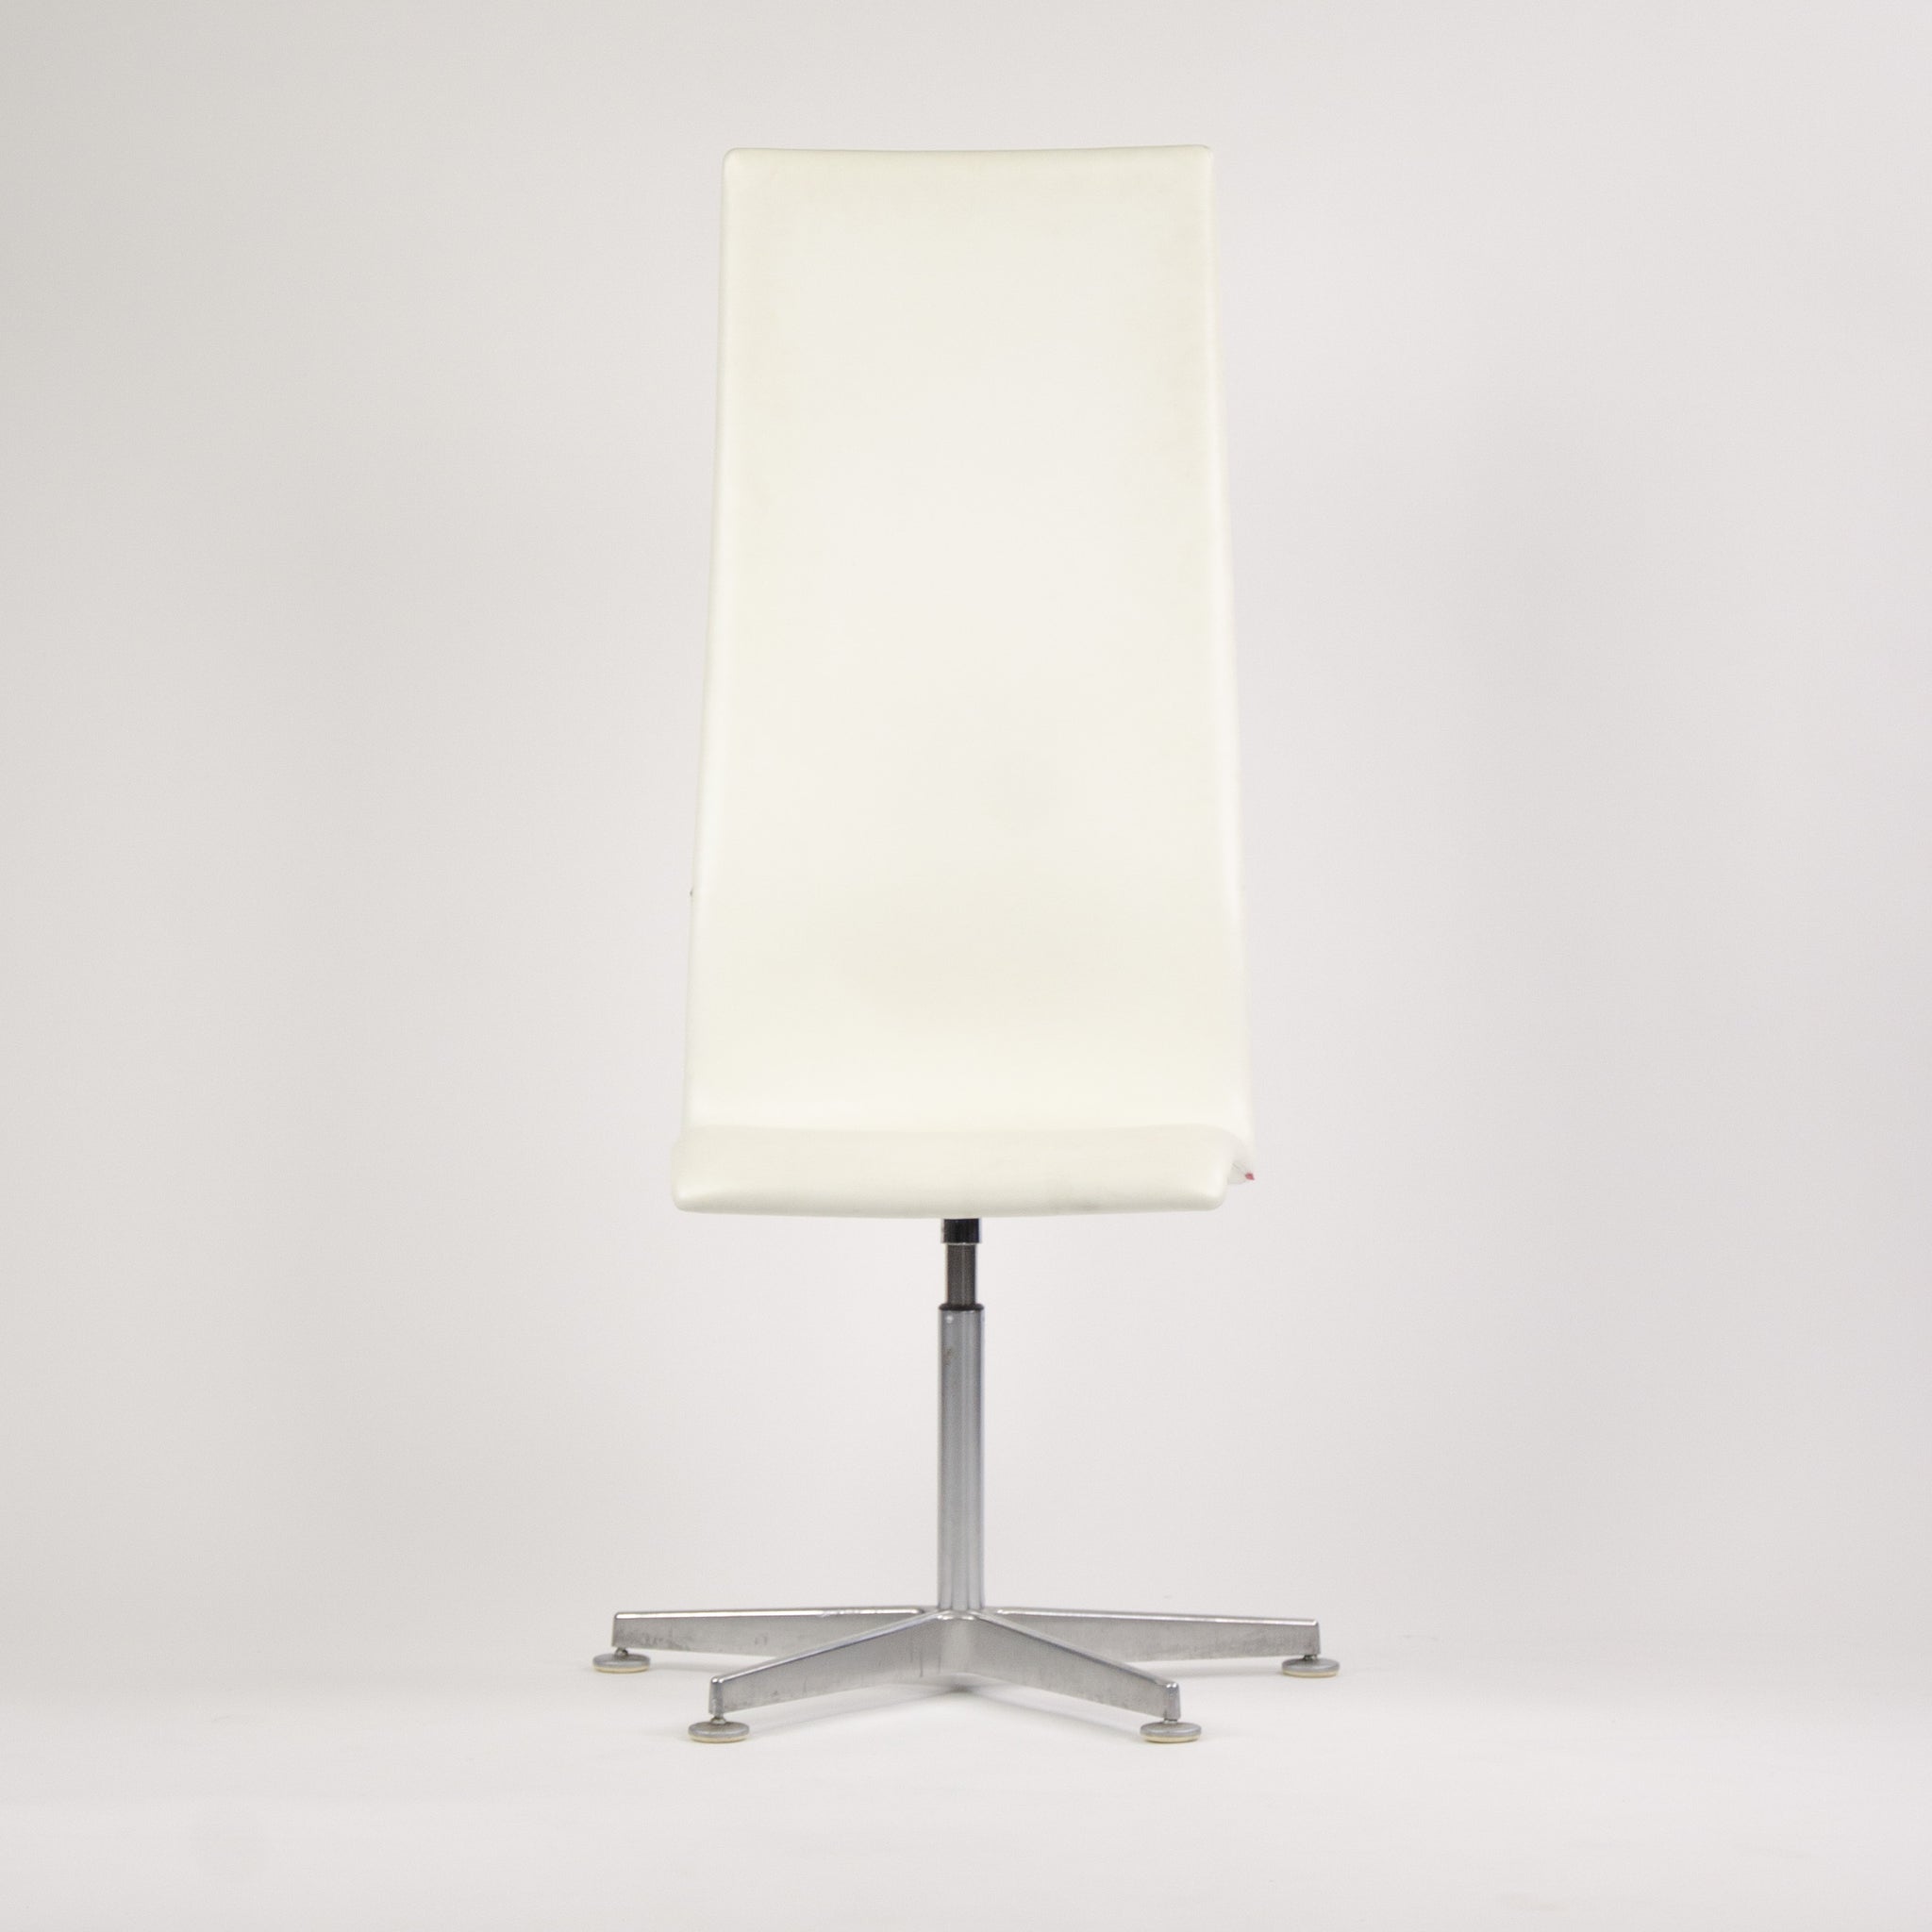 Fritz Hansen Arne Jacobsen Tall Oxford Chair White Leather 2007 4x Available